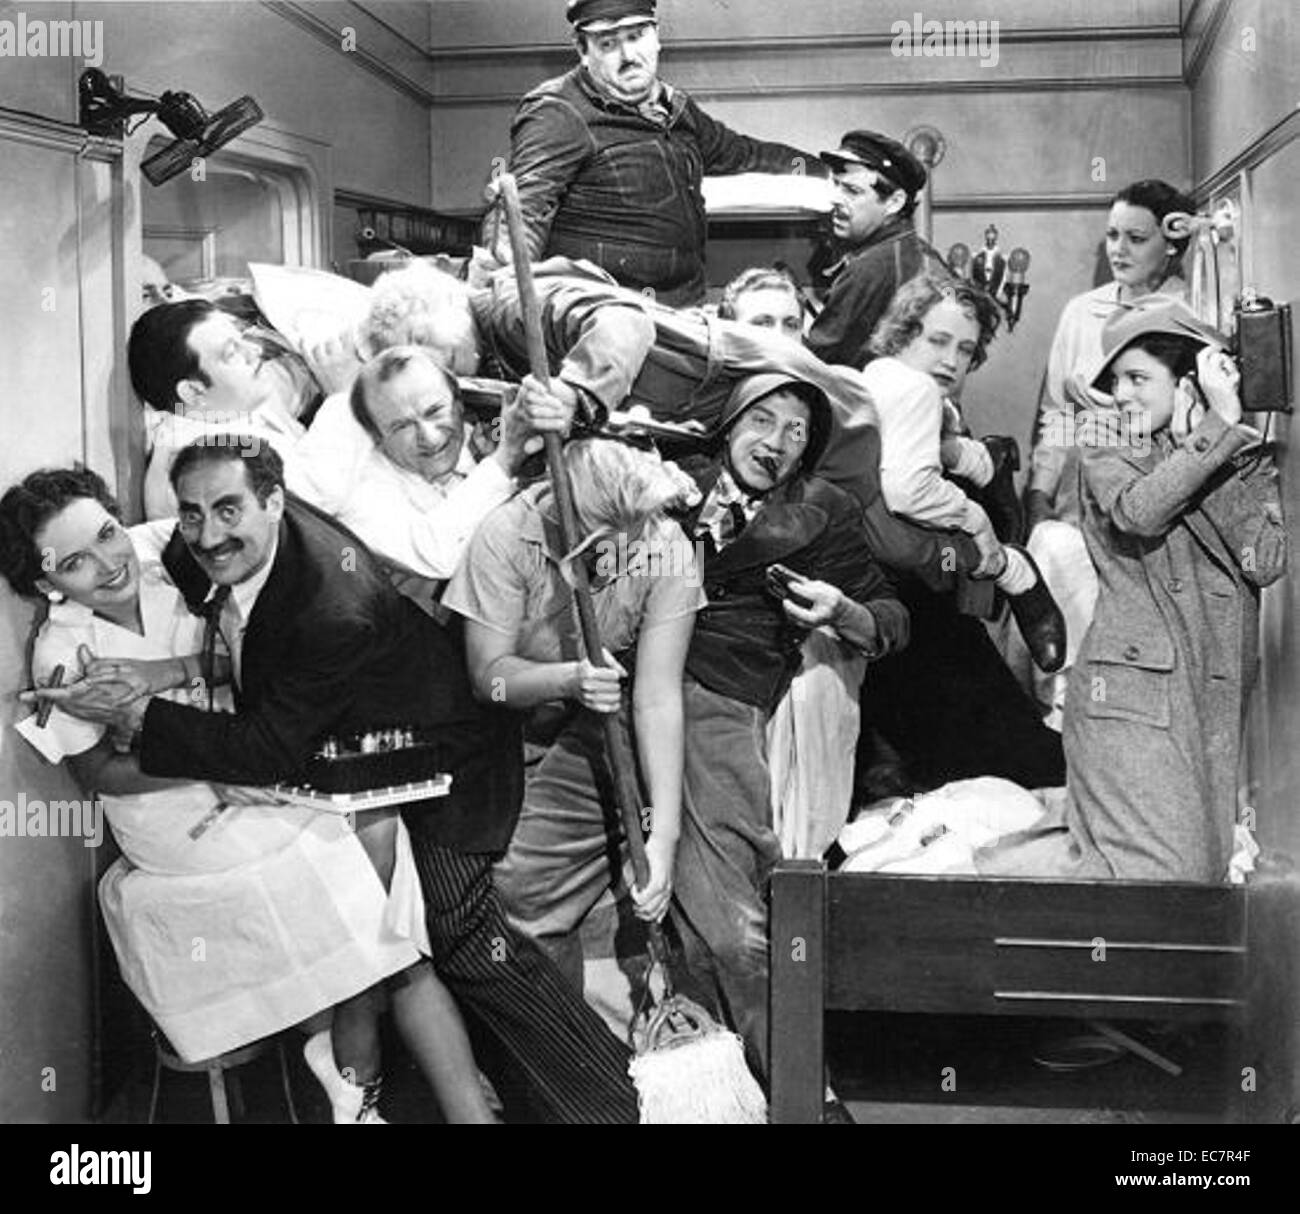 The stateroom scene from 1935 comedy film A Night At The Opera. Starring Groucho, Chico and Harpo Marx it was directed by Sam Wood and was a box office hit. Stock Photo